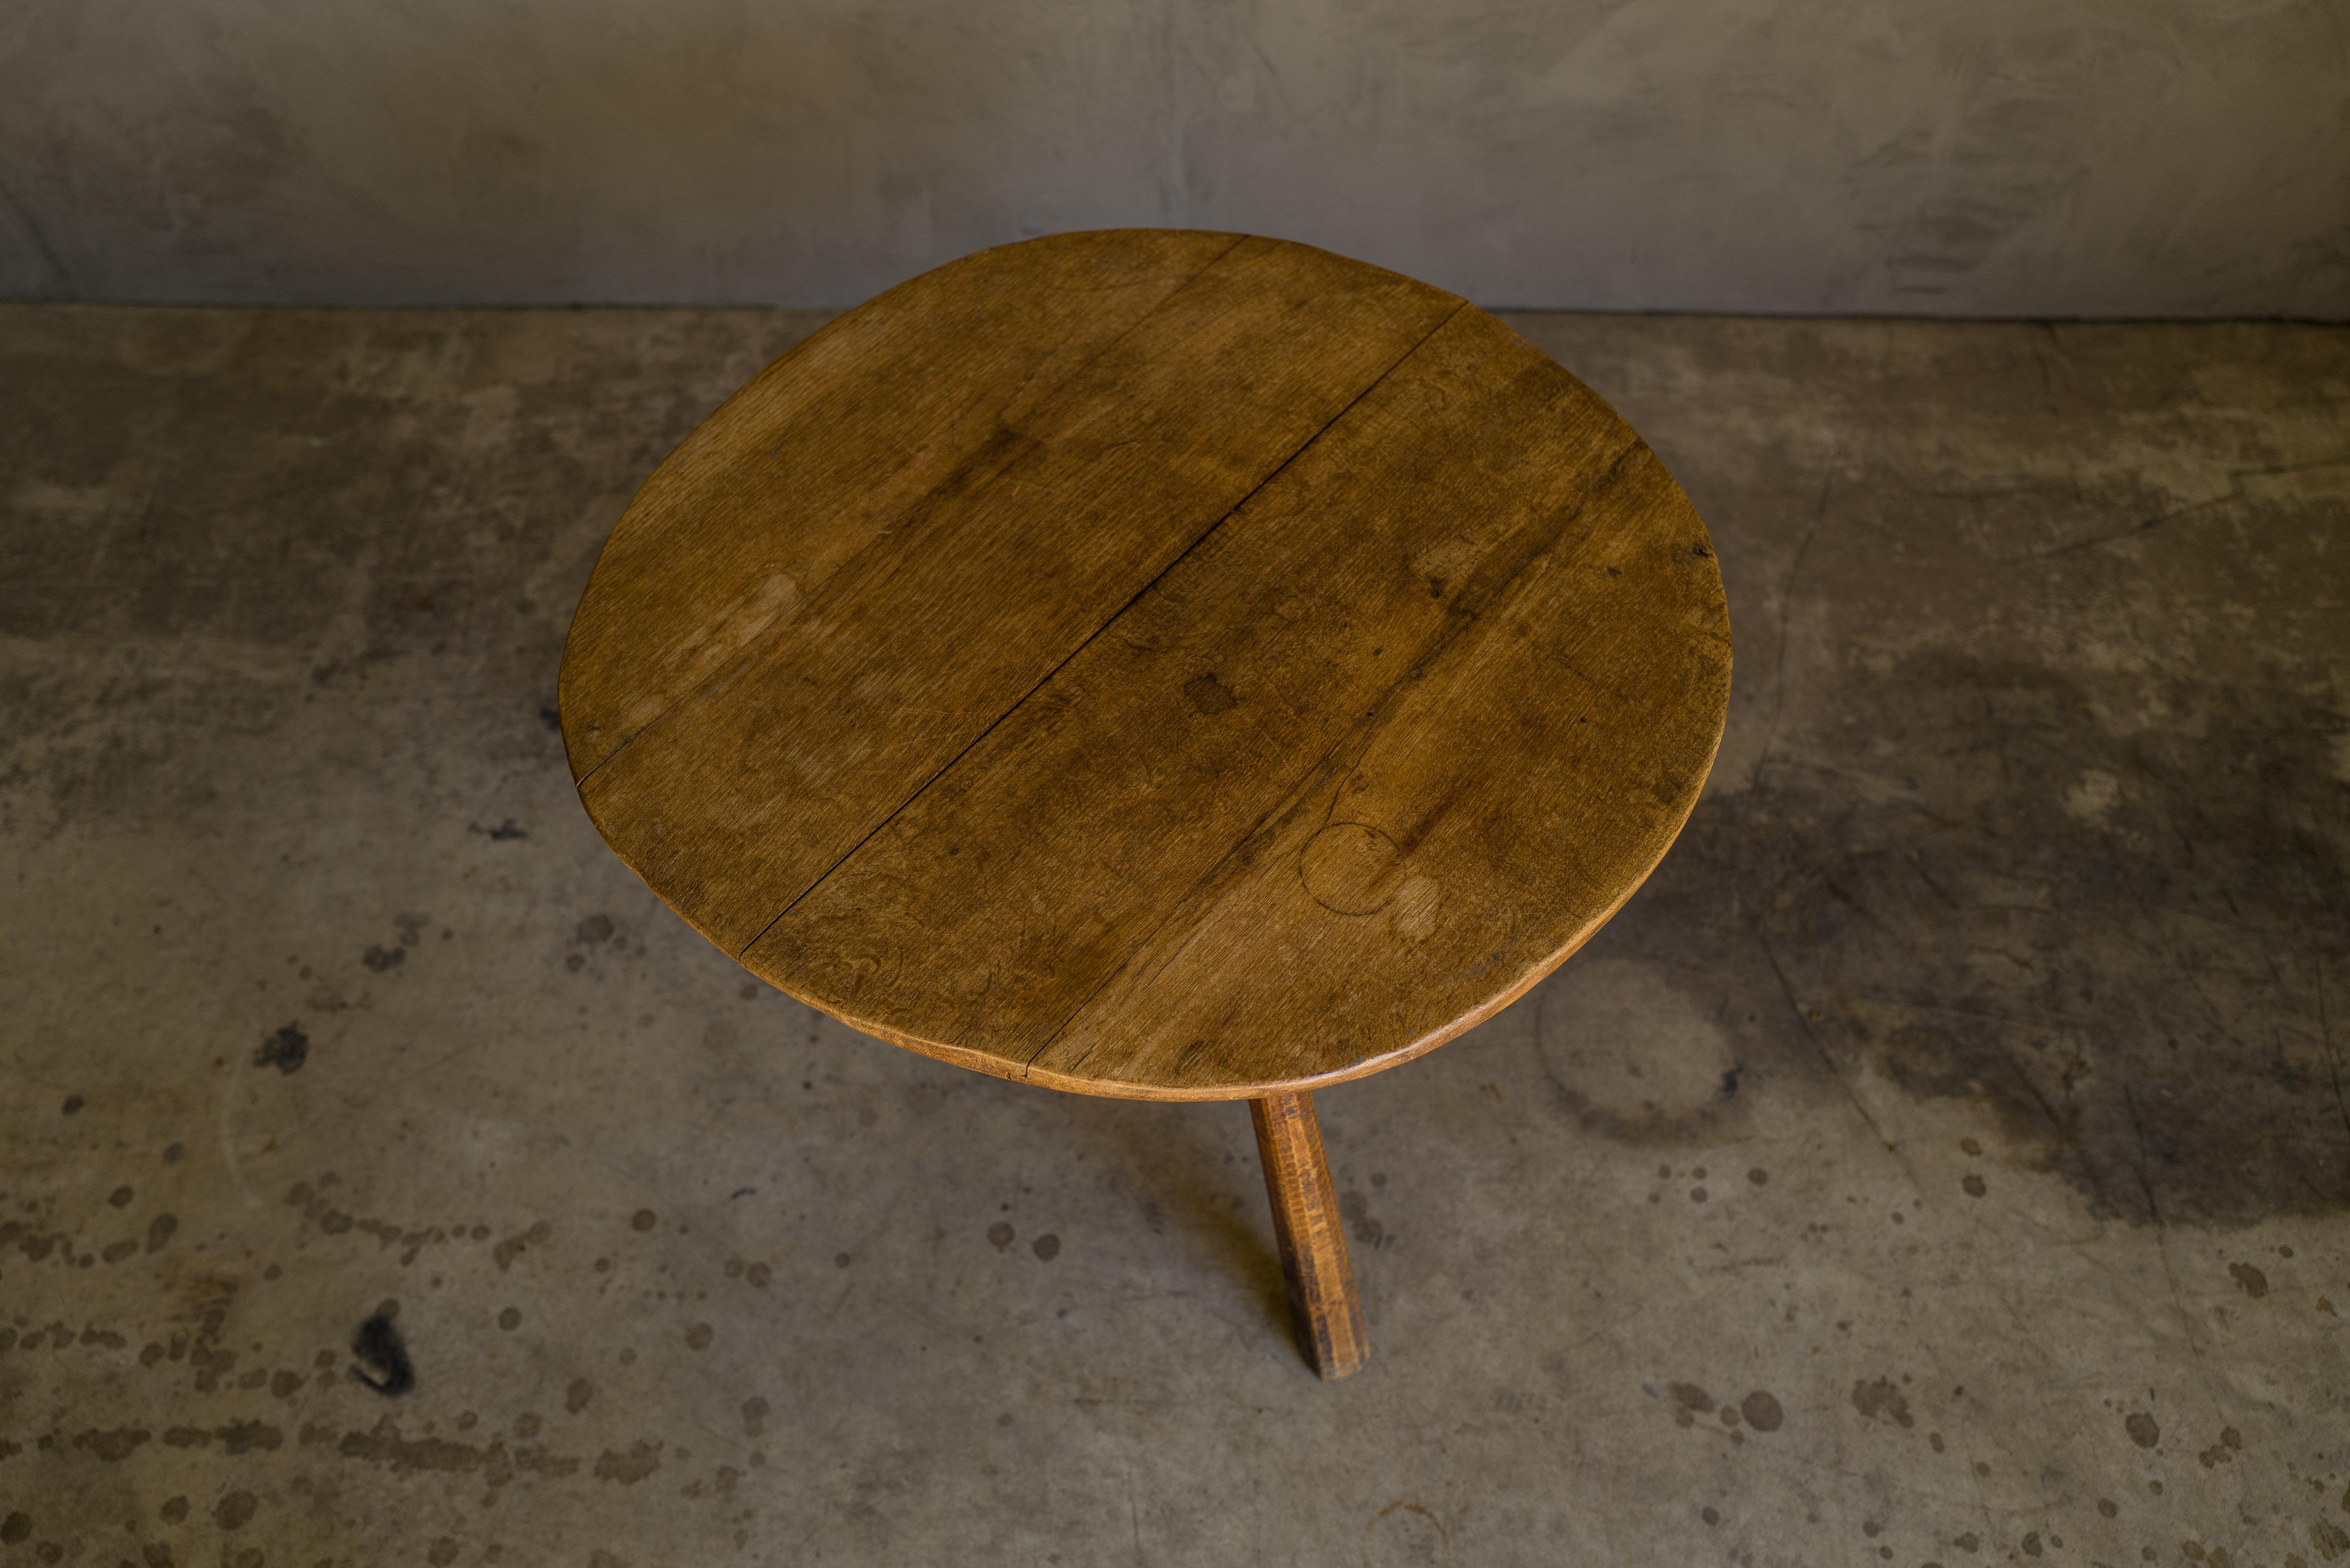 Primitive oak coffee table from France, circa 1950. Unusual model with irregular uneven top. Very nice patina and wear.